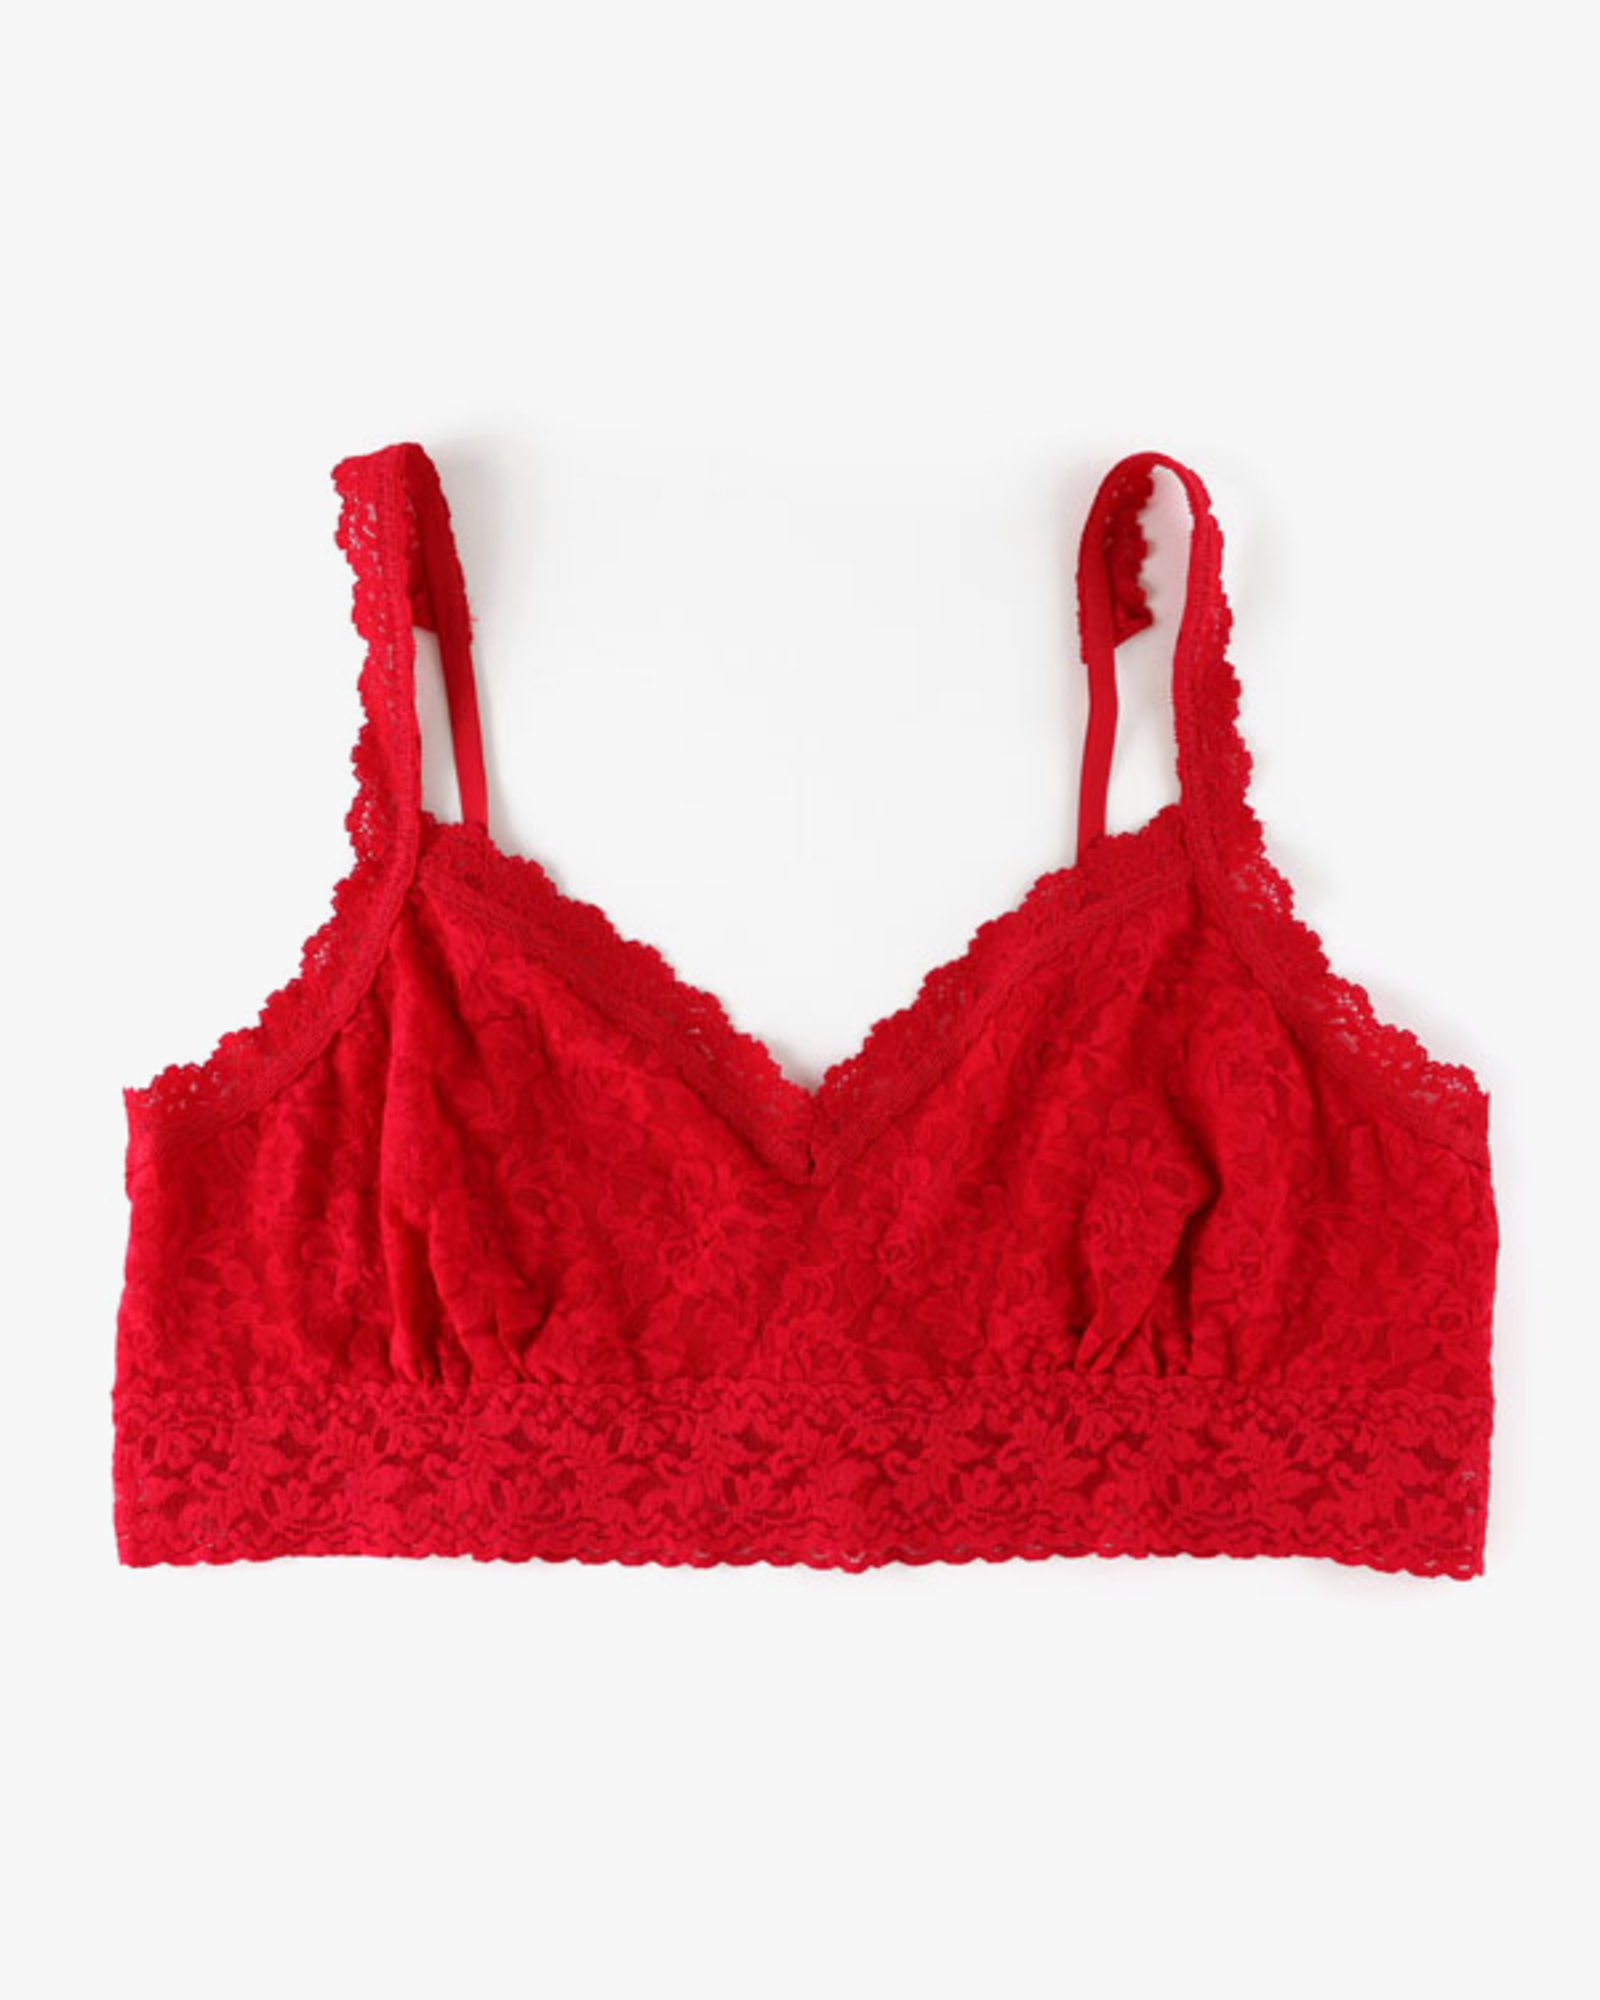 Endless Desire Red Lace Bralette